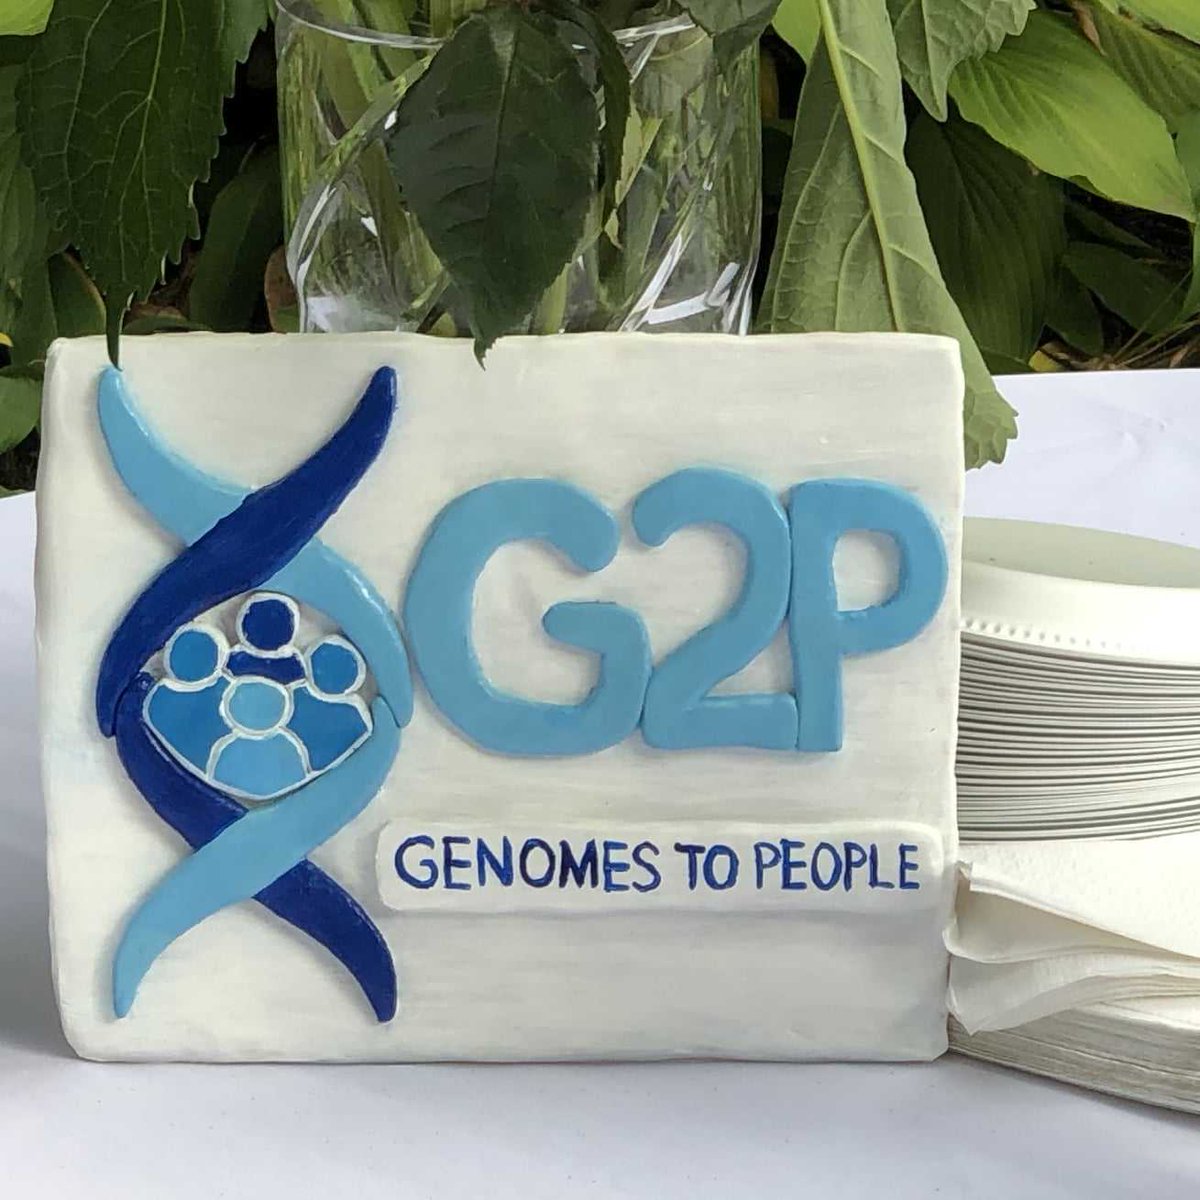 One of our talented summer trainees, Sophia Seitz-Shewmon, made this beautiful plaque for us. It's amazing how everyone in our research group is so multifaceted, but we all share one common interest: preventive genomics.🧬

#GeneChat #PreventiveGenomics #Research #Team